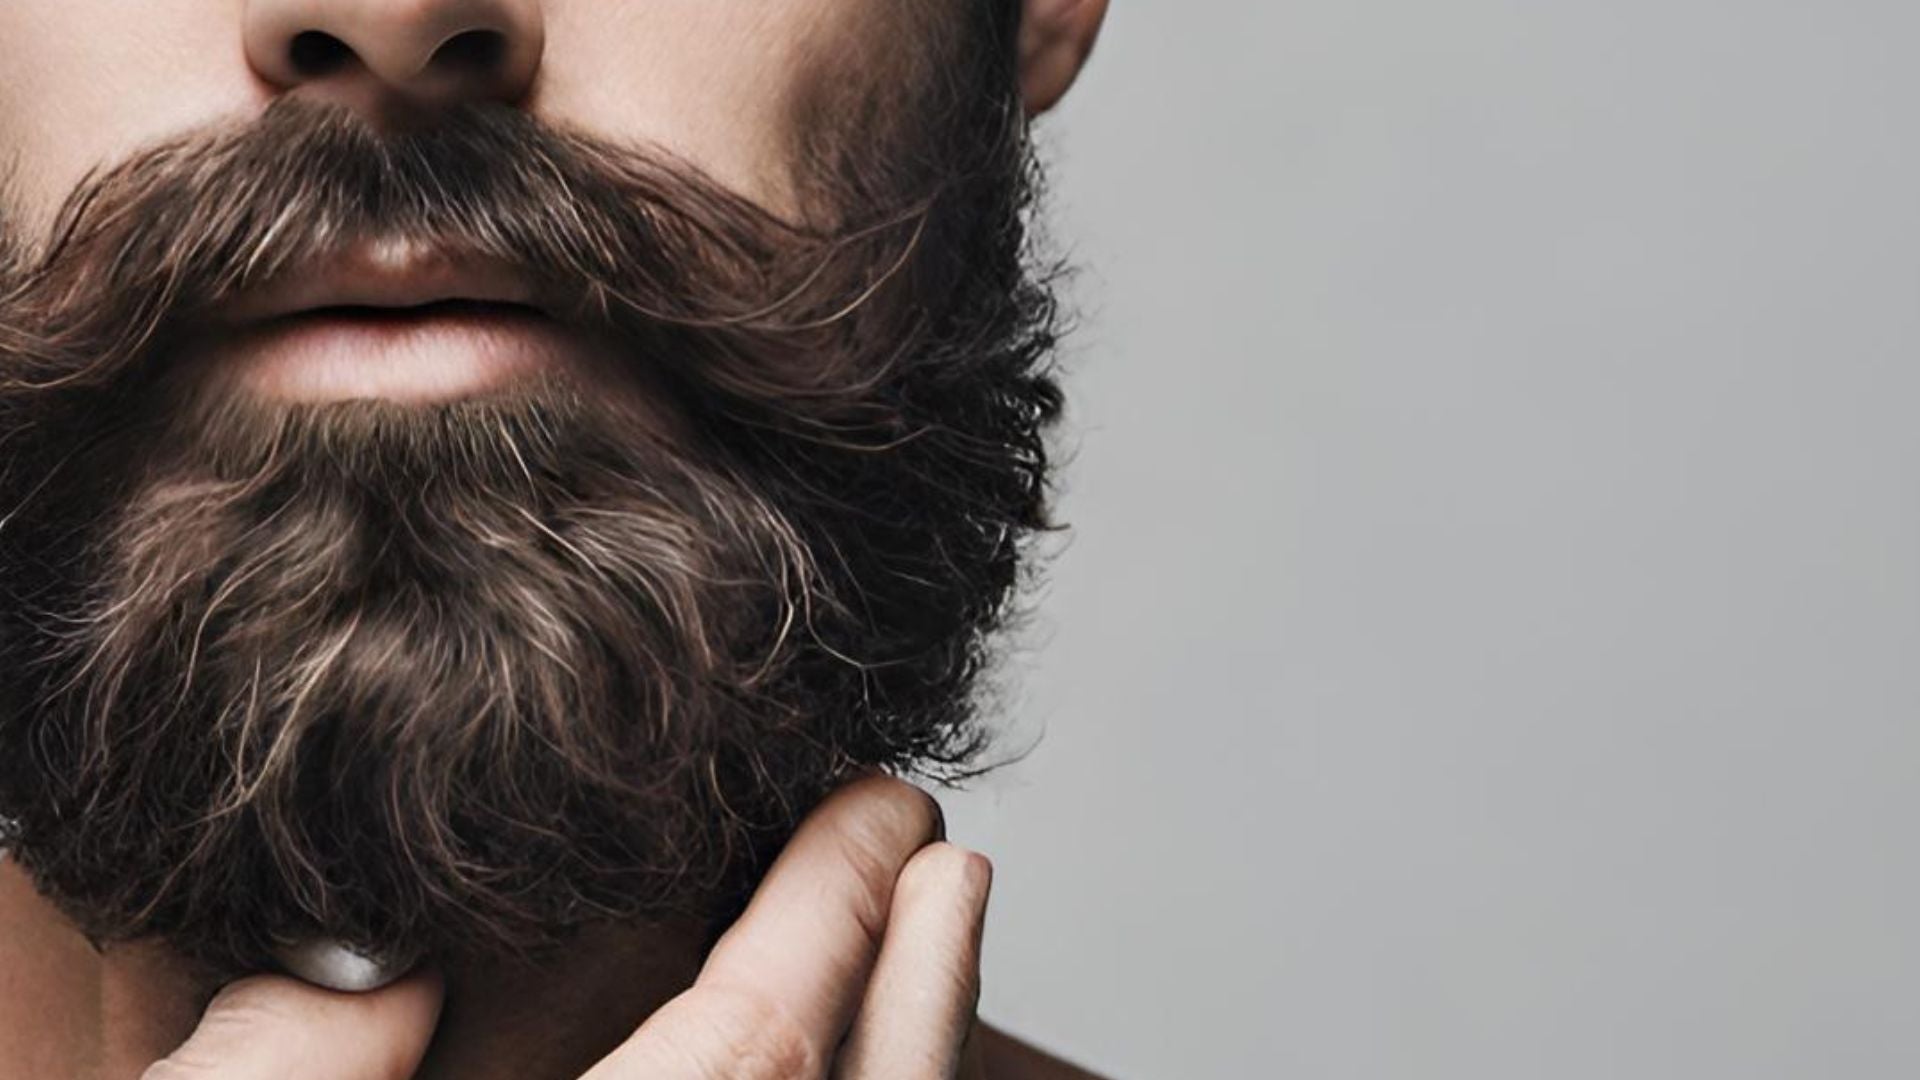 Man's face from nose to neck with a very impressive dark beard and moustache